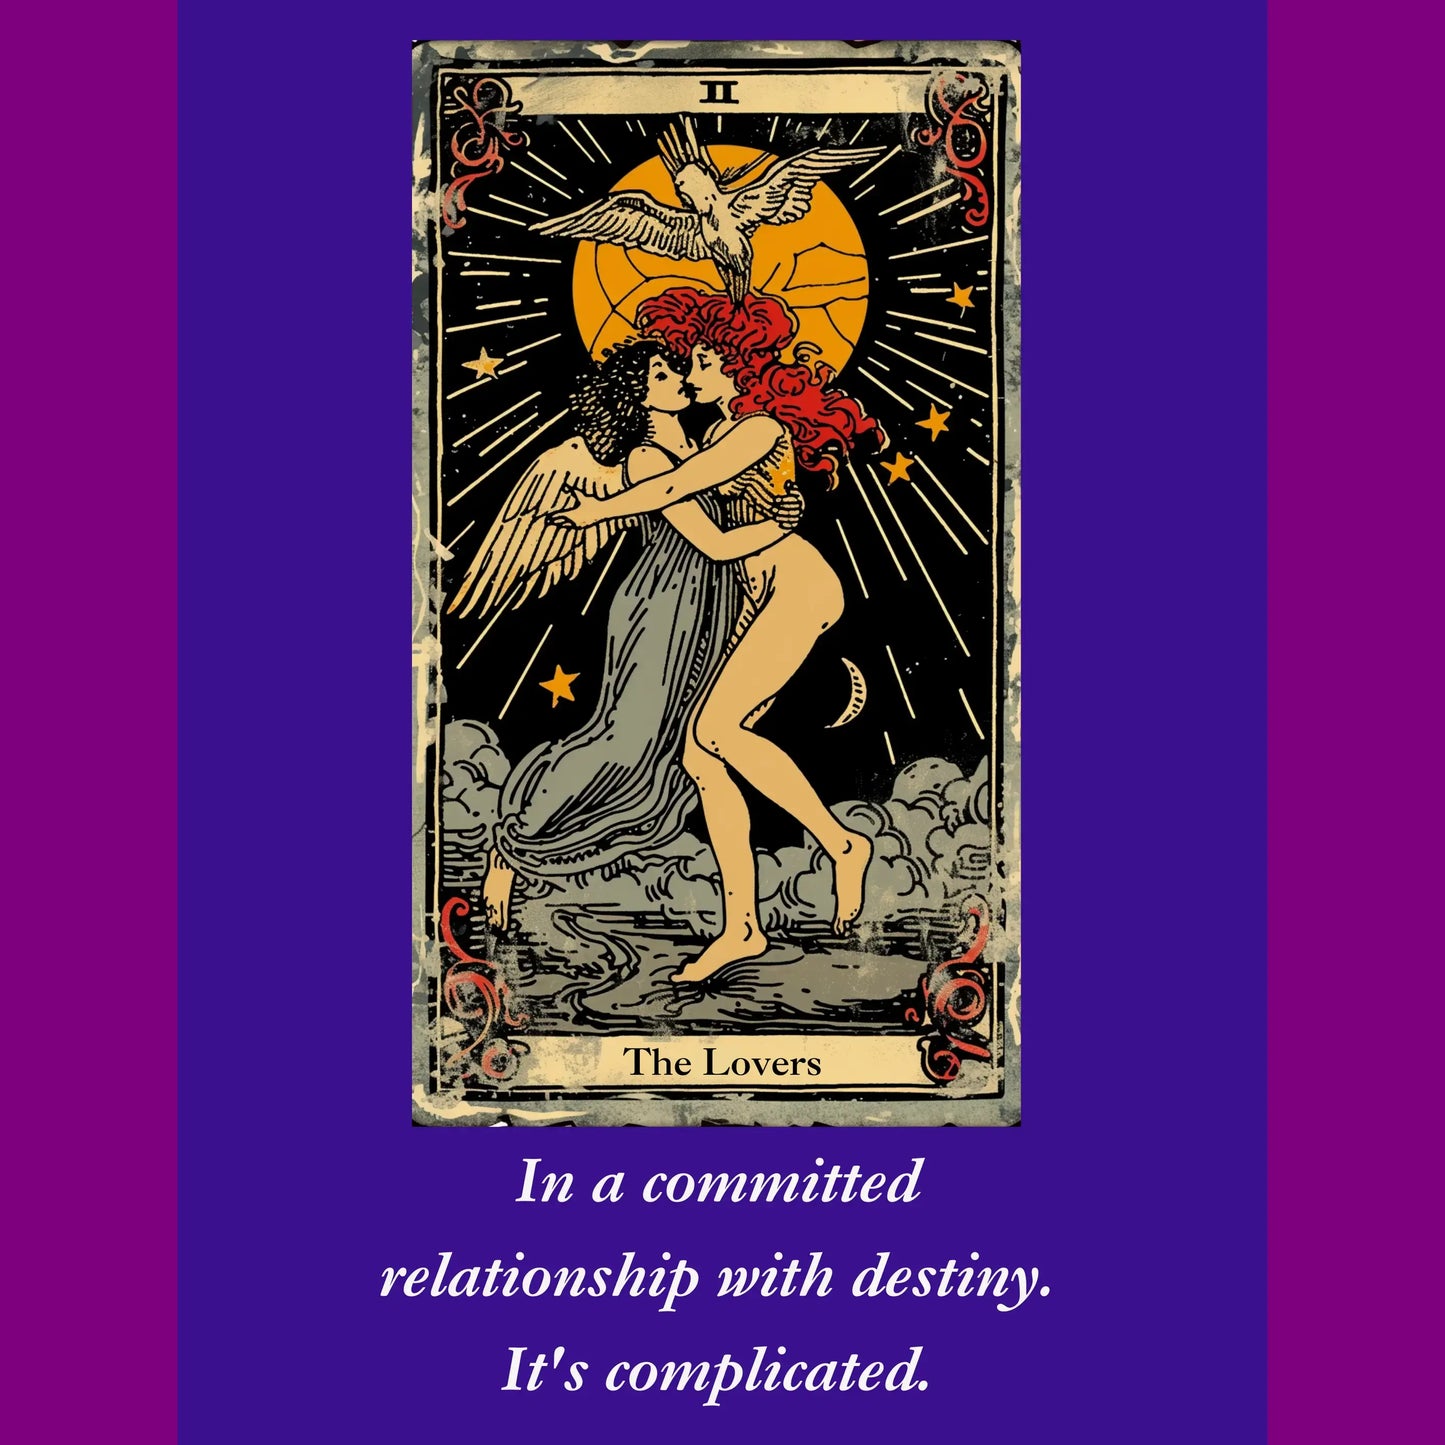 In a committed relationship with destiny it's complicated. Funny graphic. design featuring the lovers tarot card from Blk Moon shop.